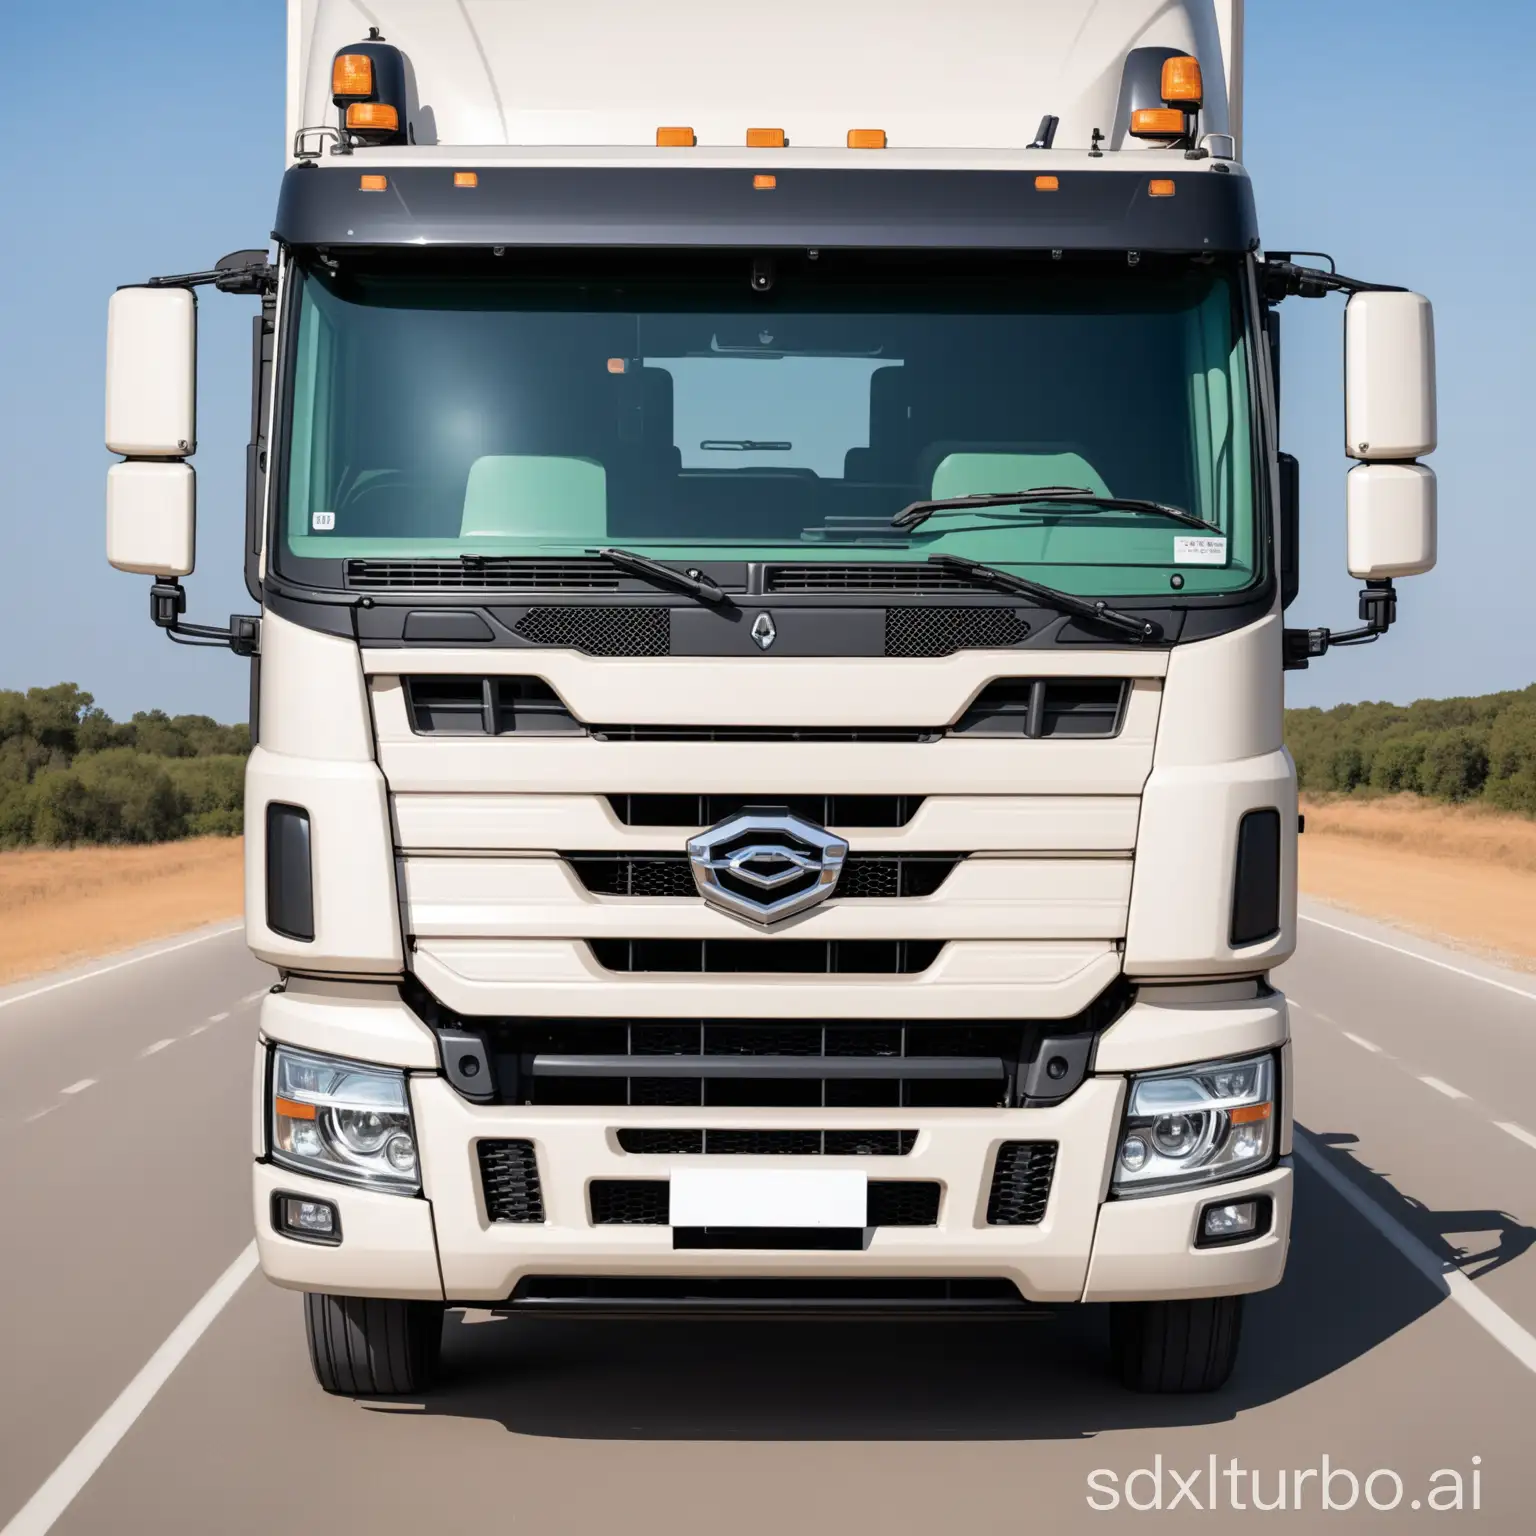 Frontal photograph of the front part of a truck from medium distance